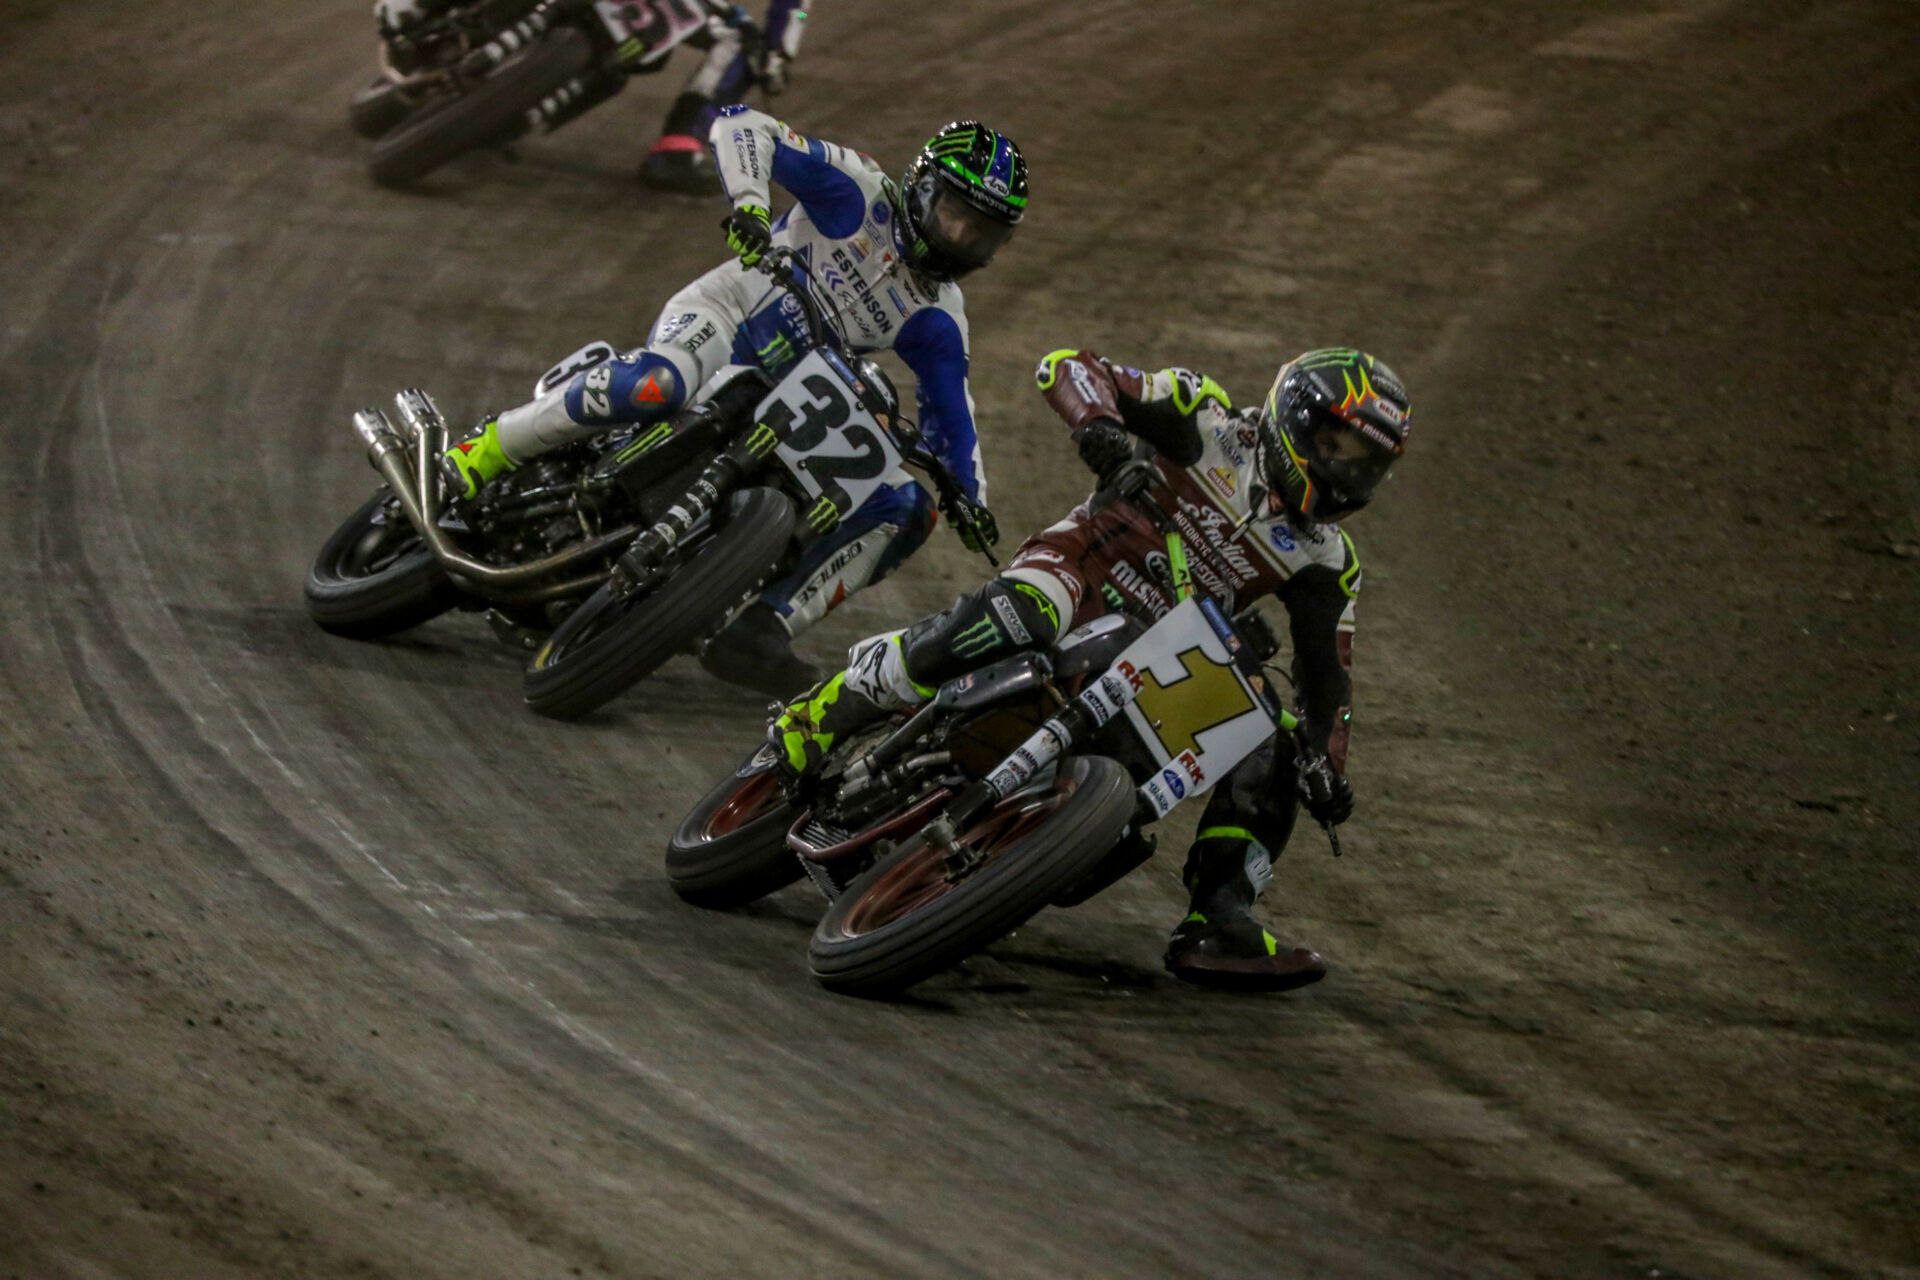 Jared Mees (1) and Dallas Daniels (32) fighting for the AFT SuperTwins lead at Texas Motor Speedway in 2022. Photo by Scott Hunter, courtesy AFT.